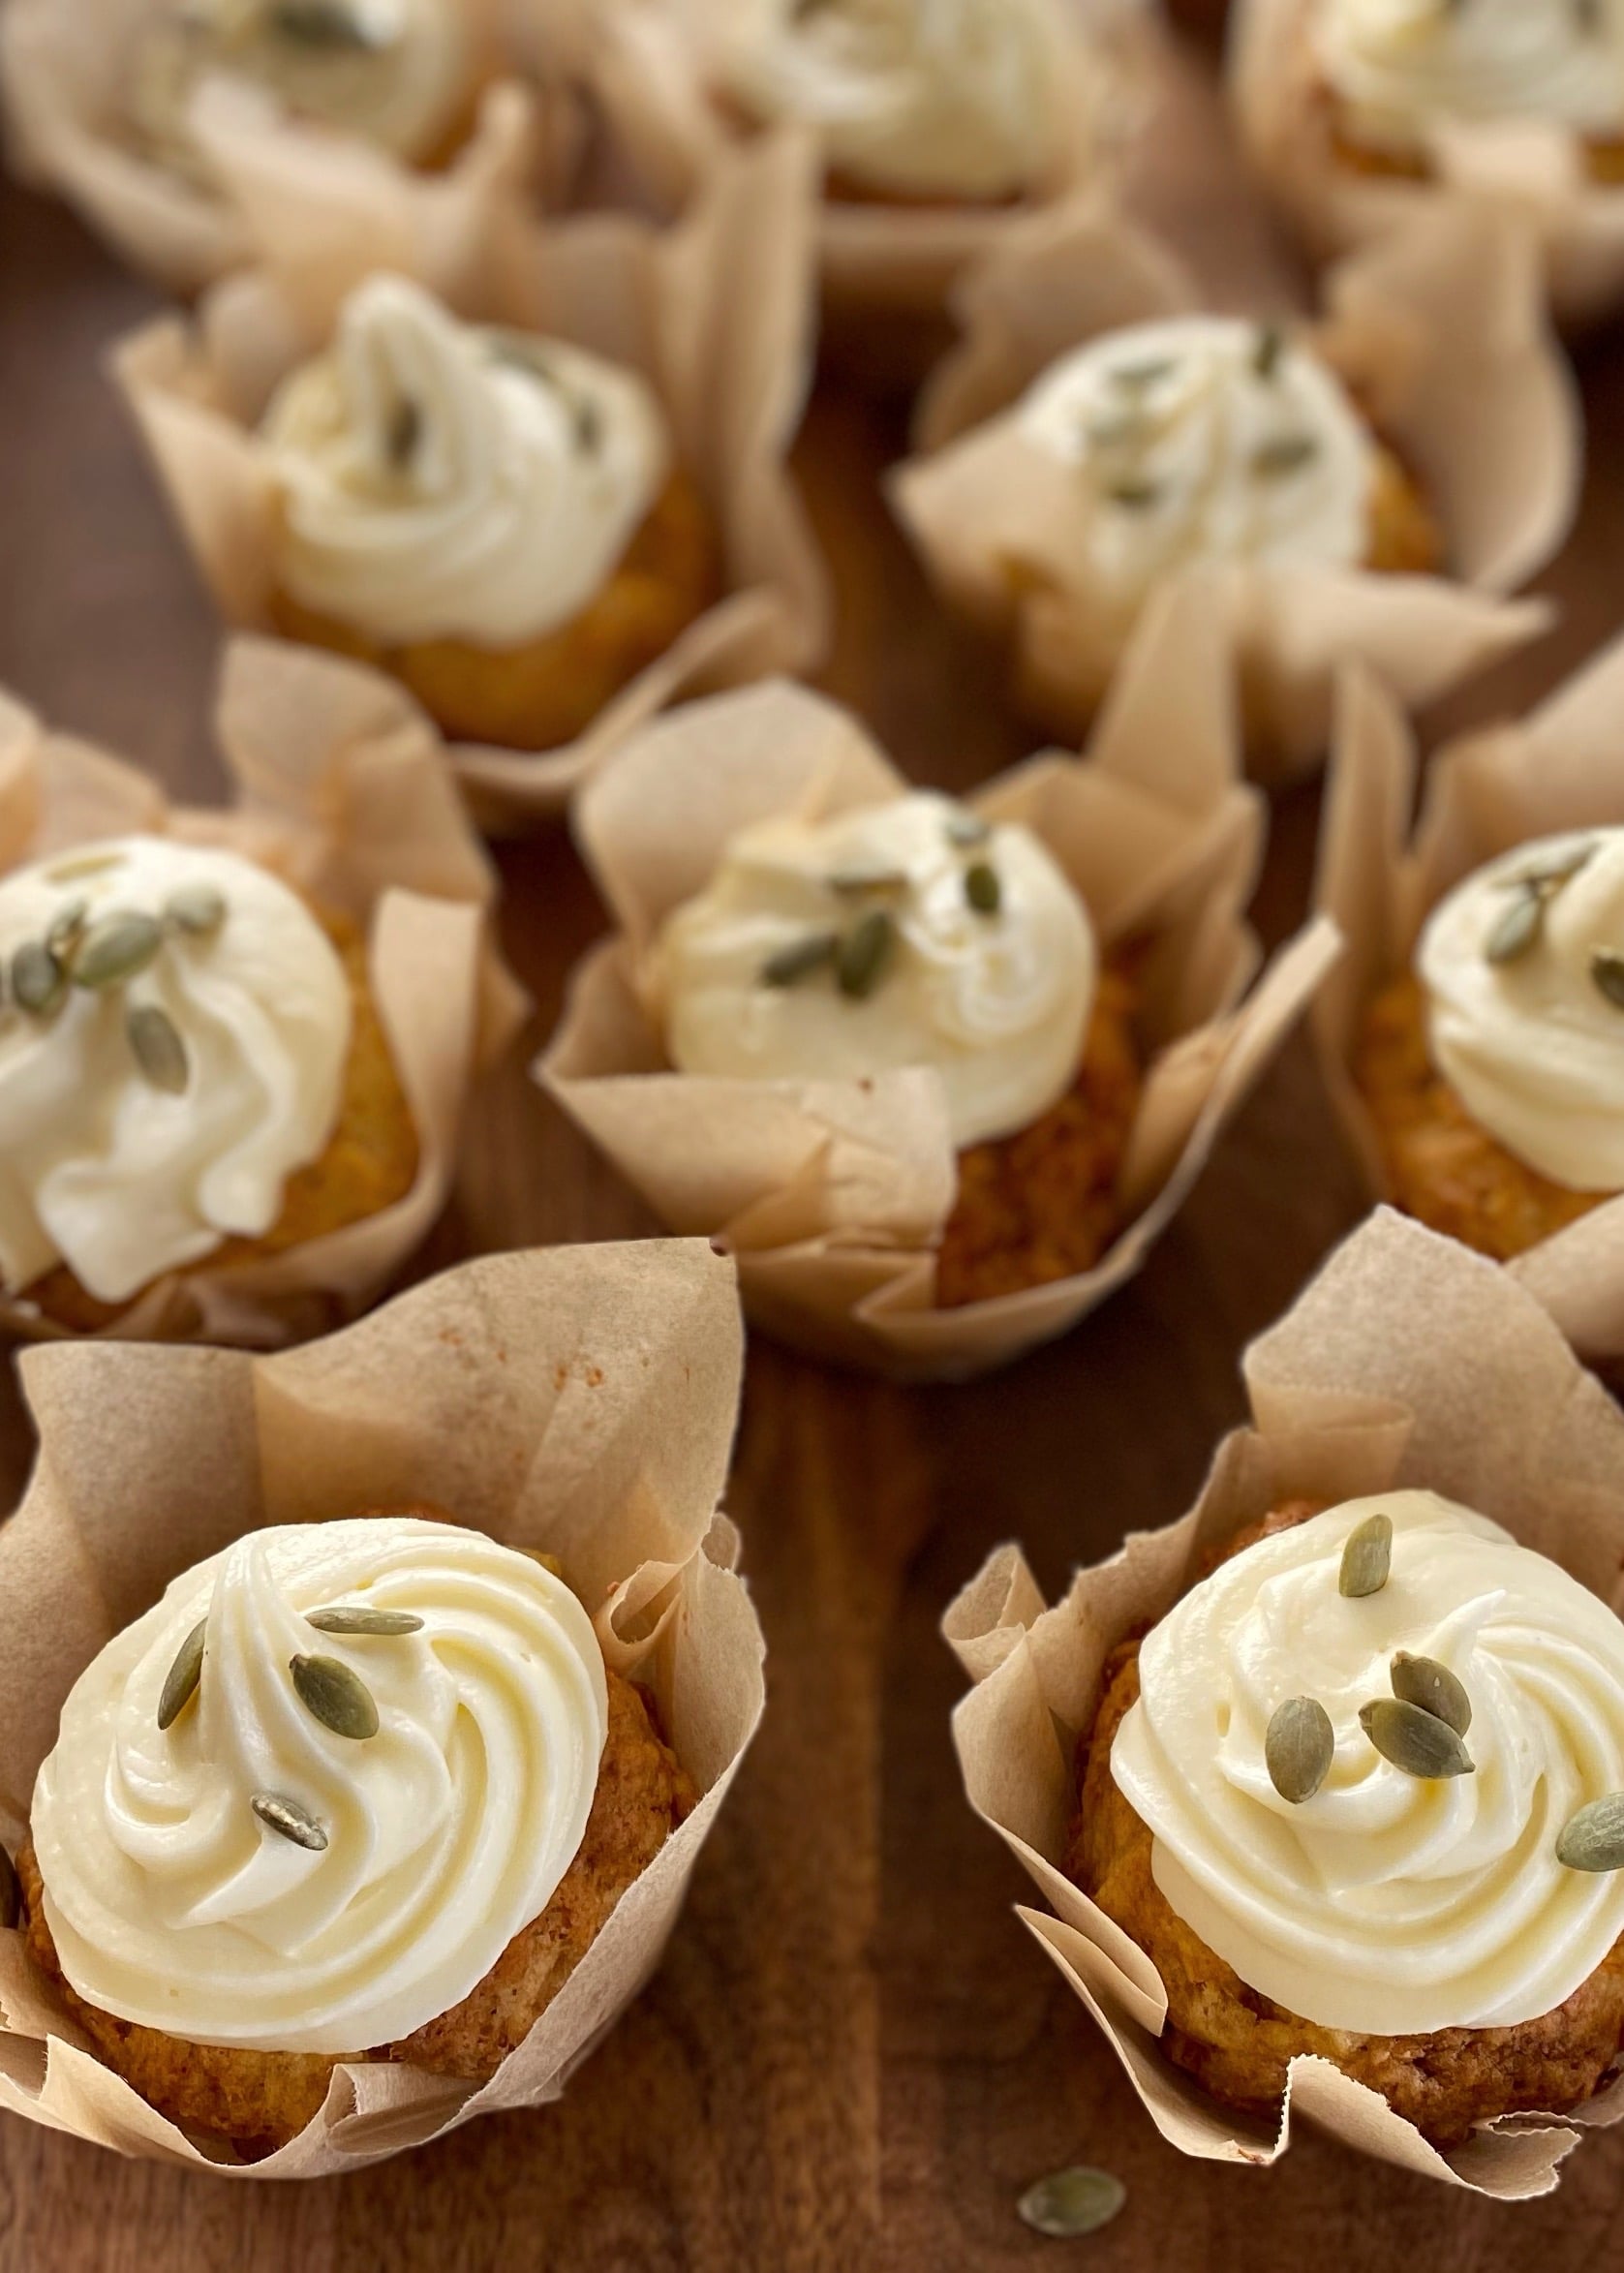 Pineapple and Carrot Muffins with Cream Cheese Icing